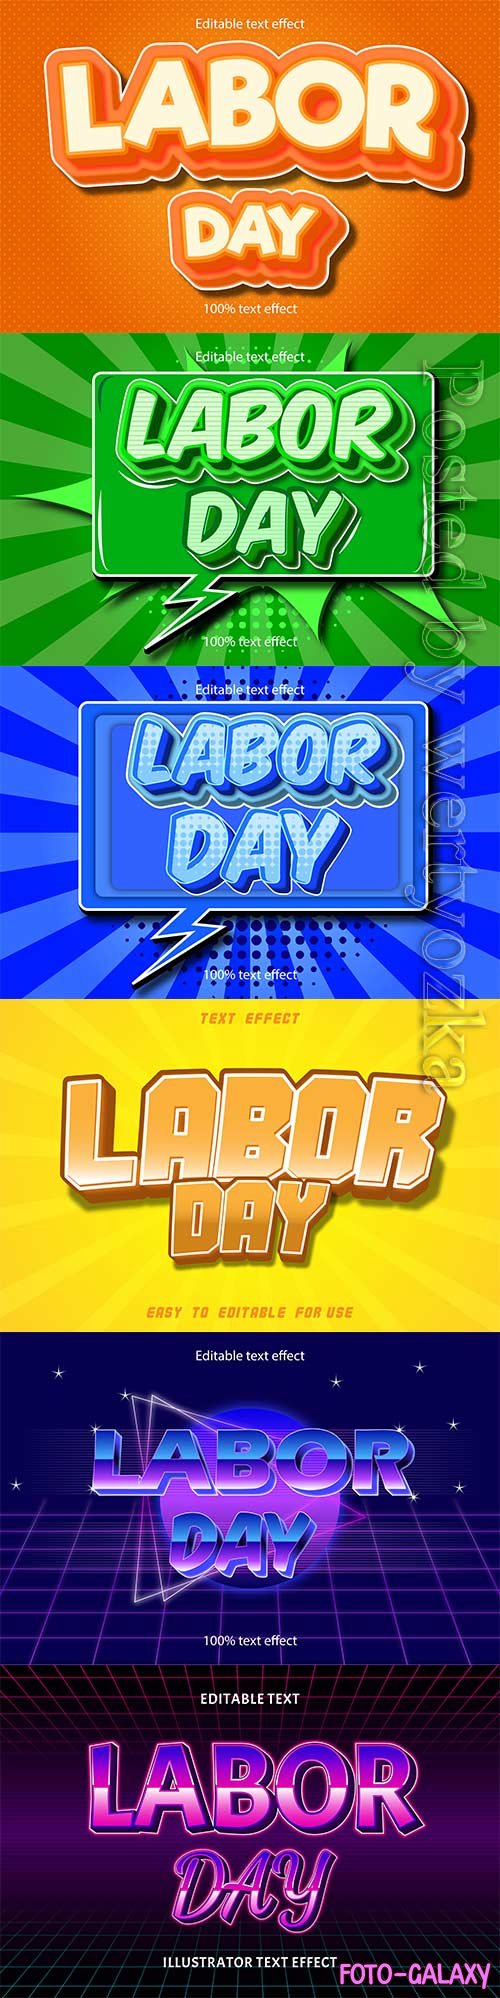 Labor day editable text effect vol 7